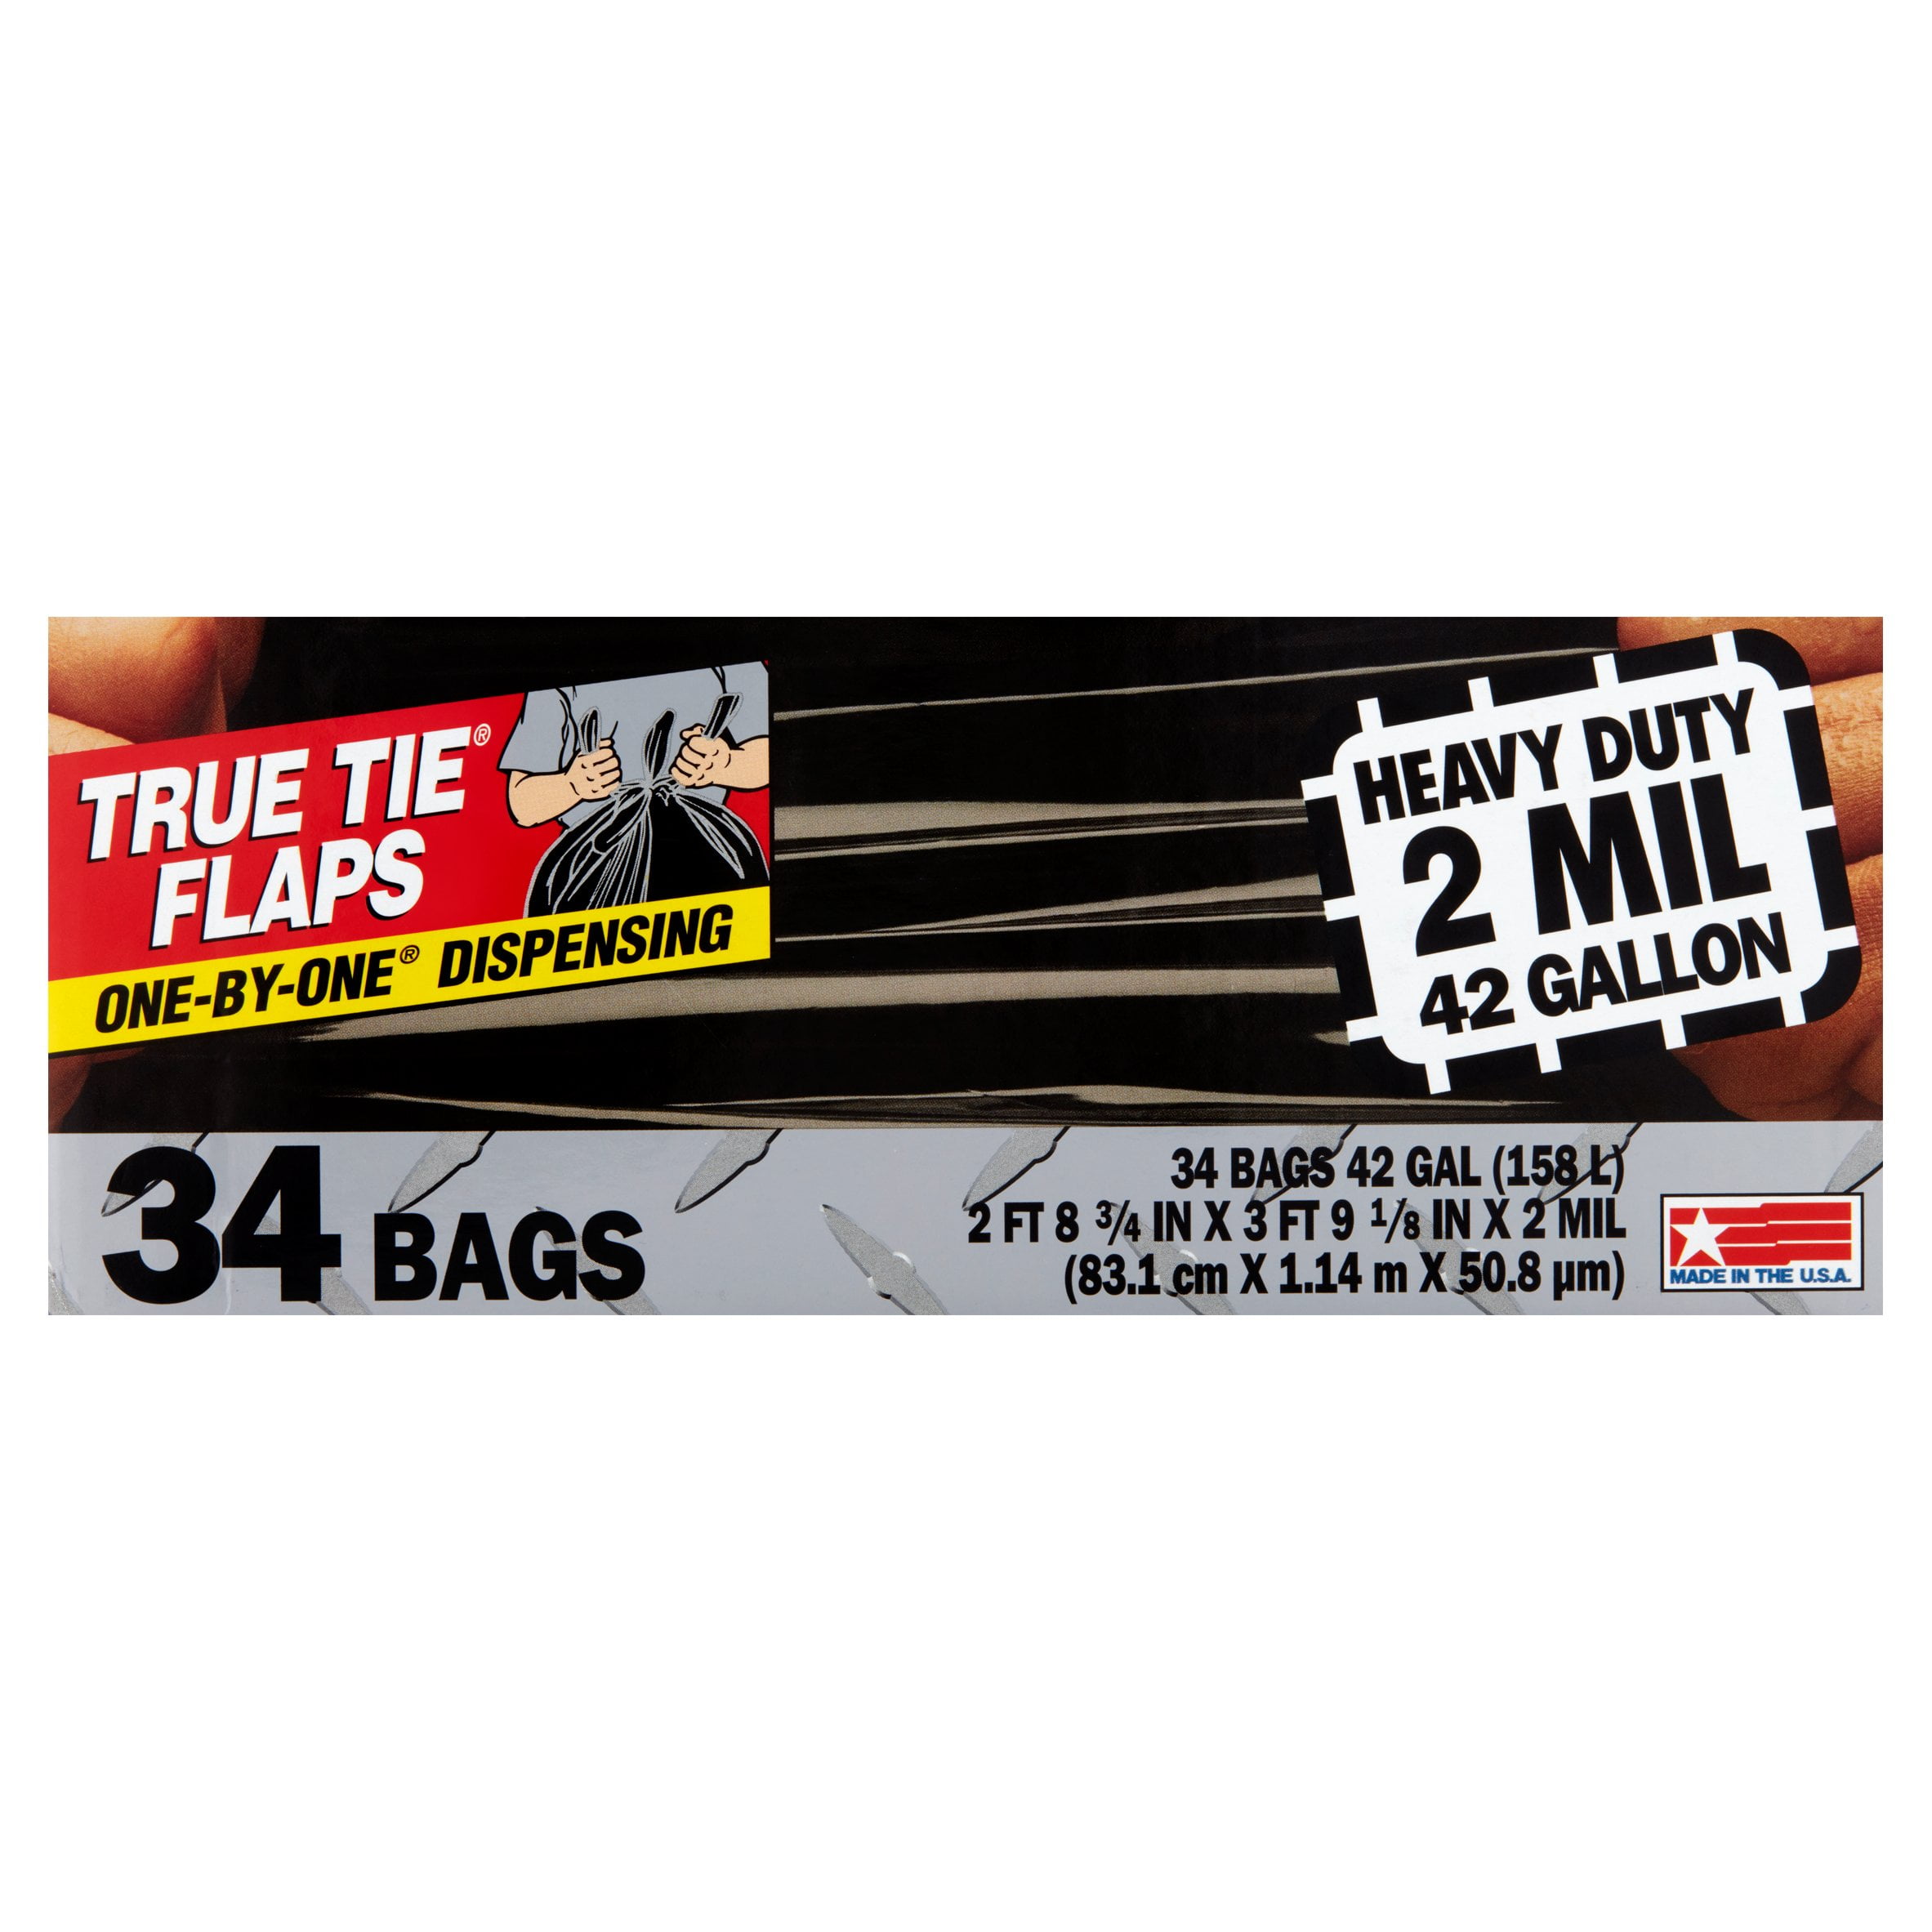 Plasticplace 42 Gallon Contractor Trash Bags, Black (50 Count) : Target